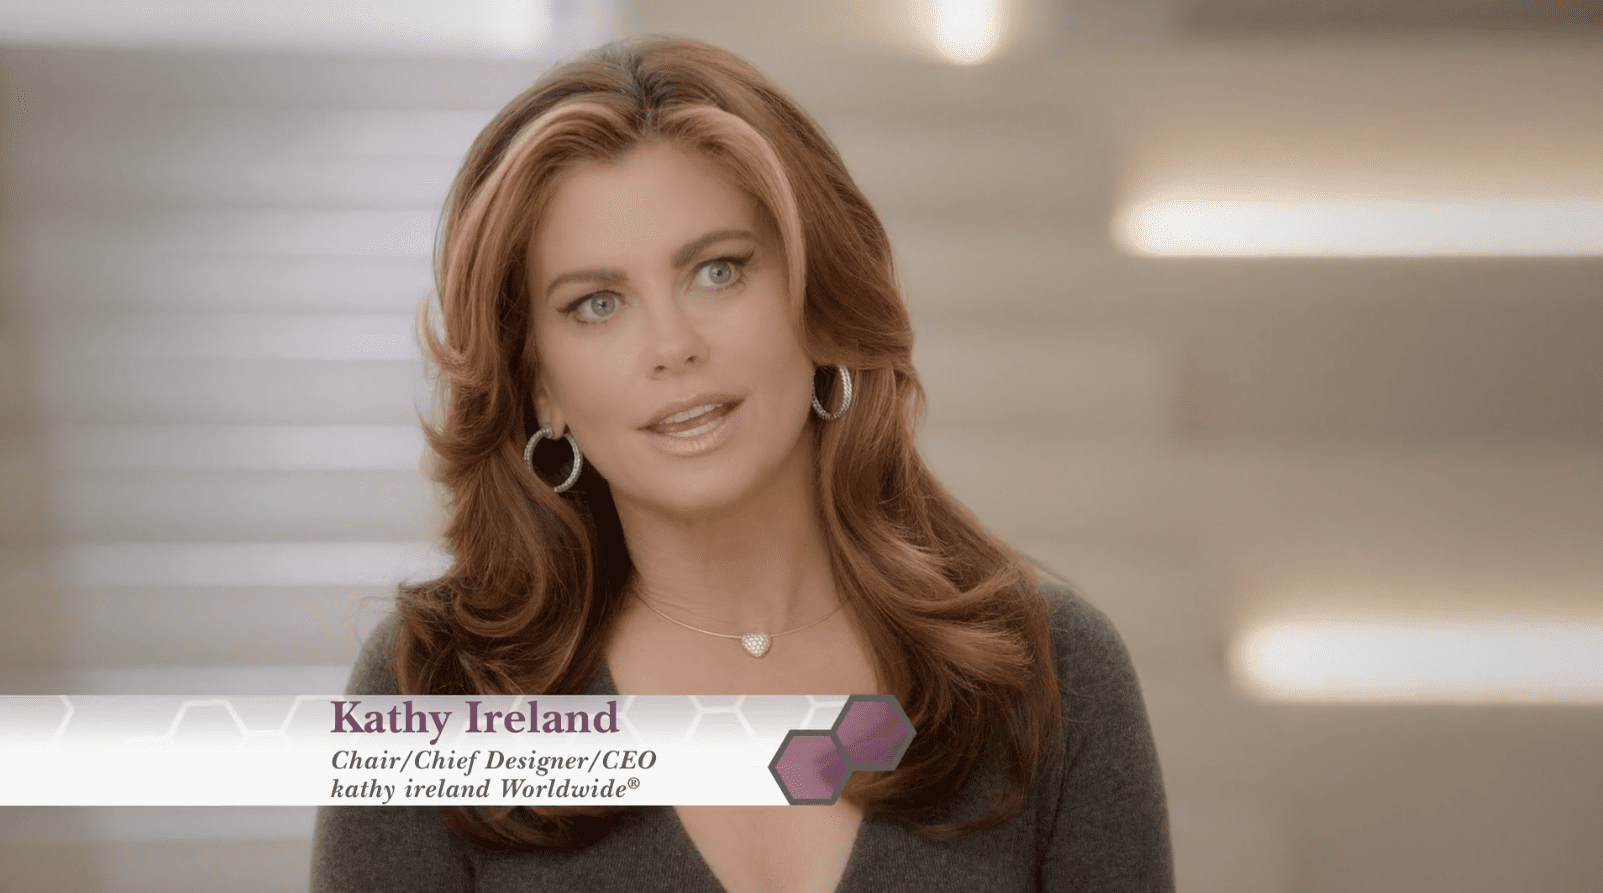 Kathy Ireland talking about her beauty products